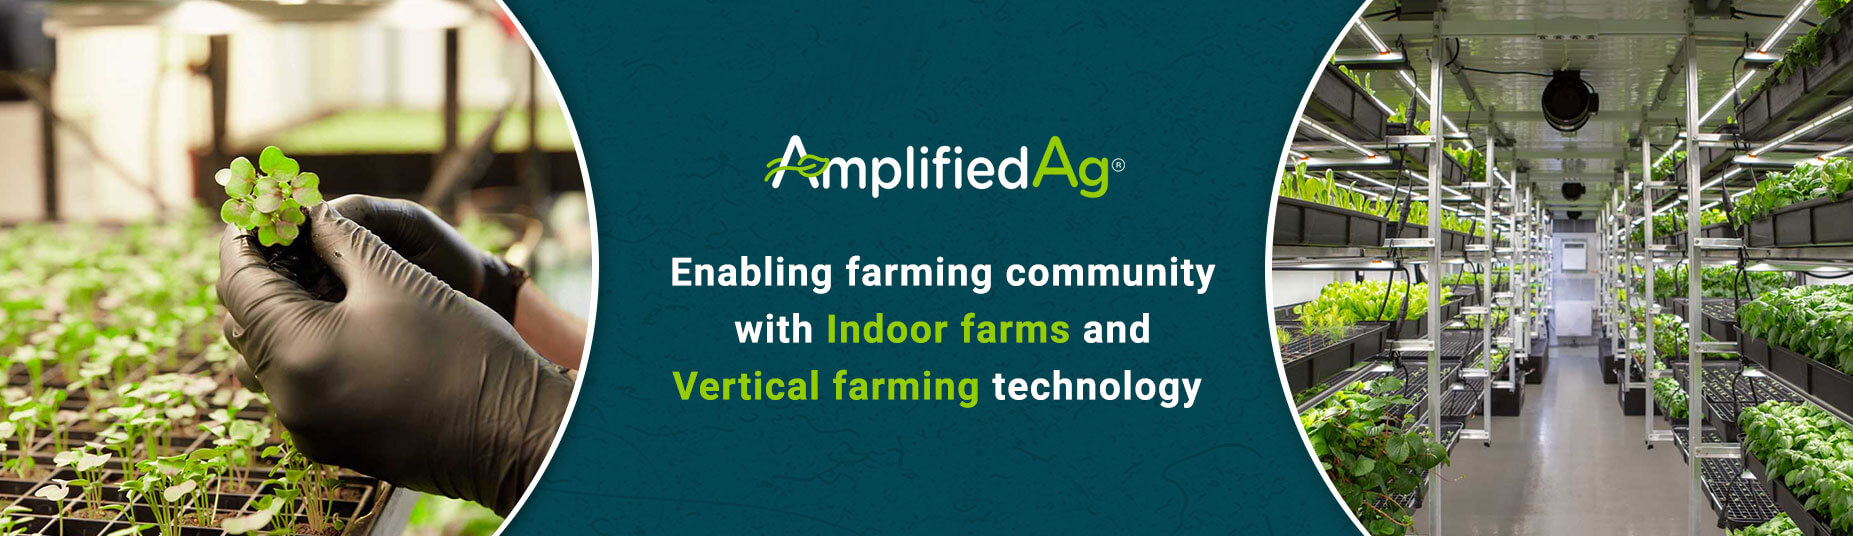 Amplified-Ag Company Growcycle